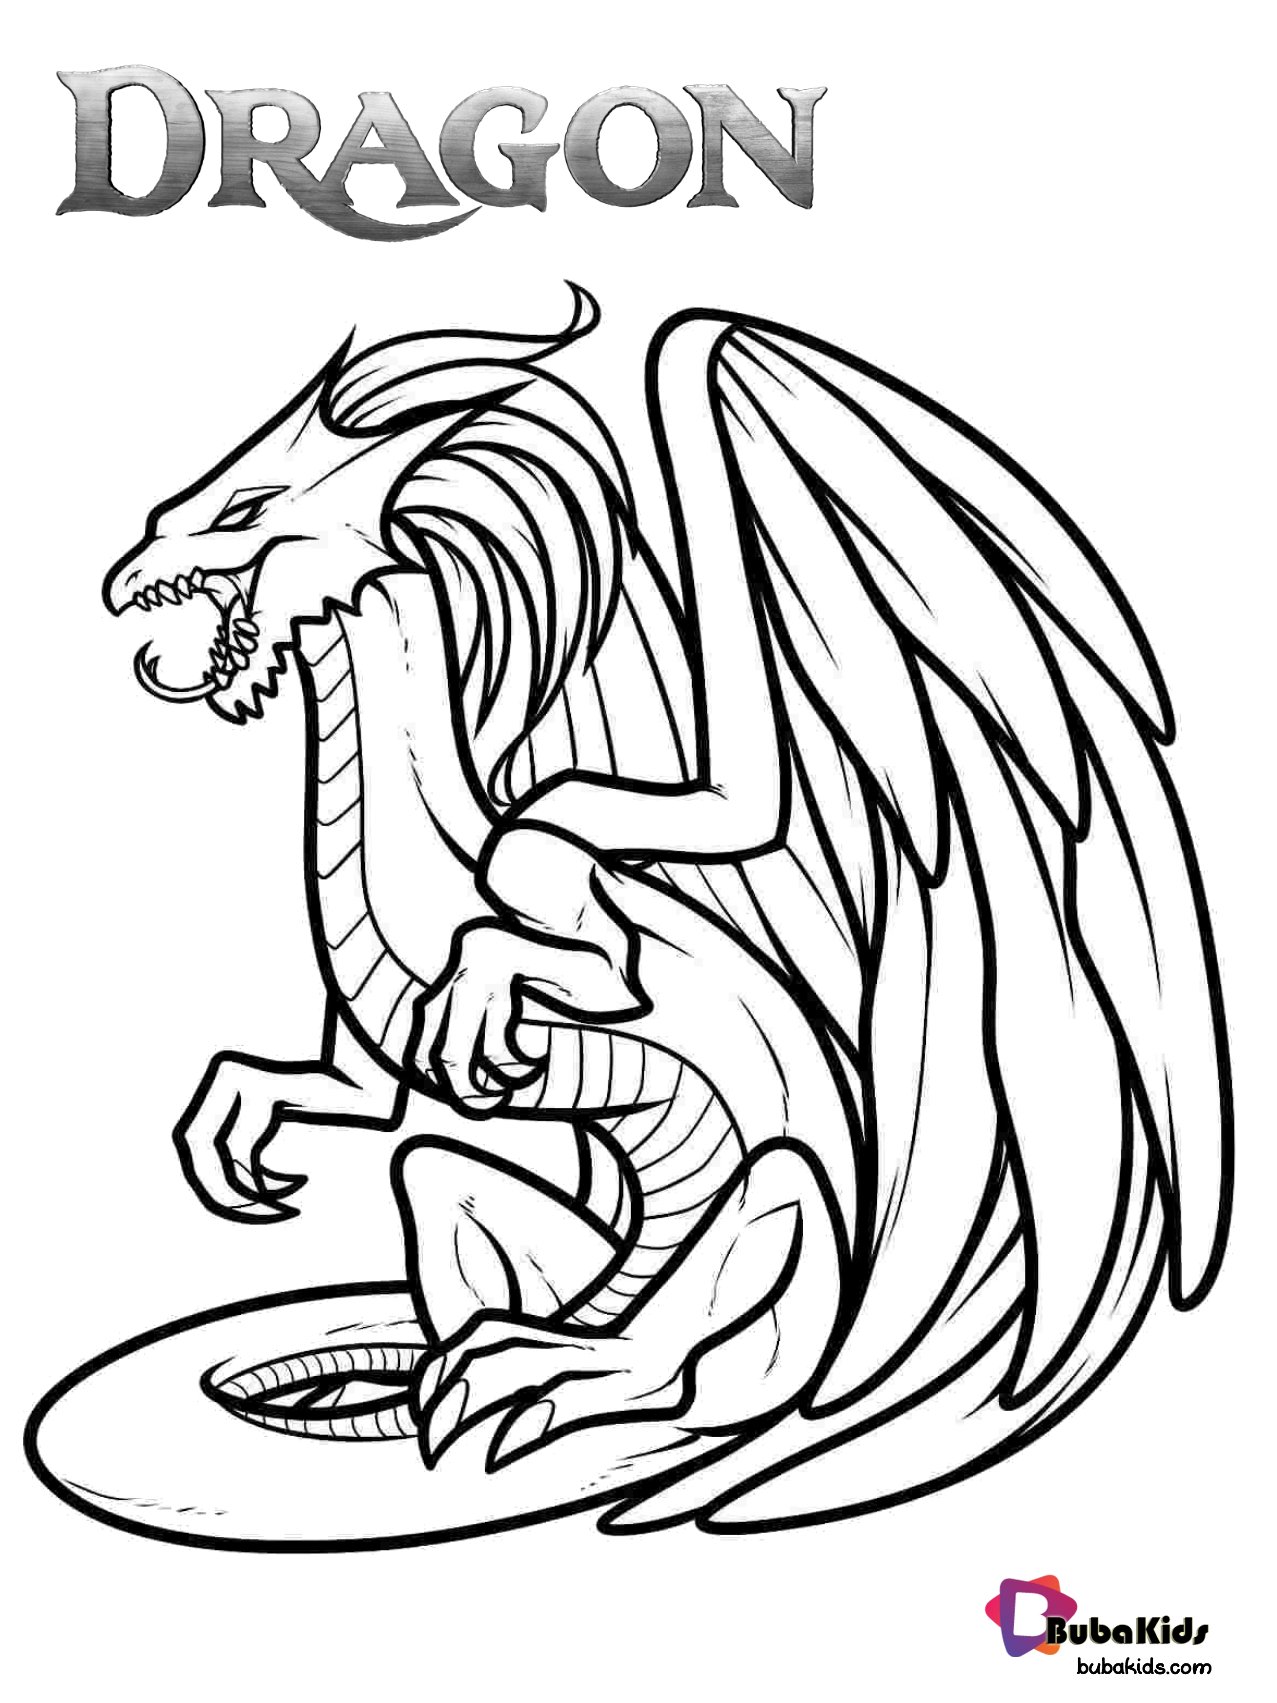 Dragon the mythical creature free coloring page. Wallpaper